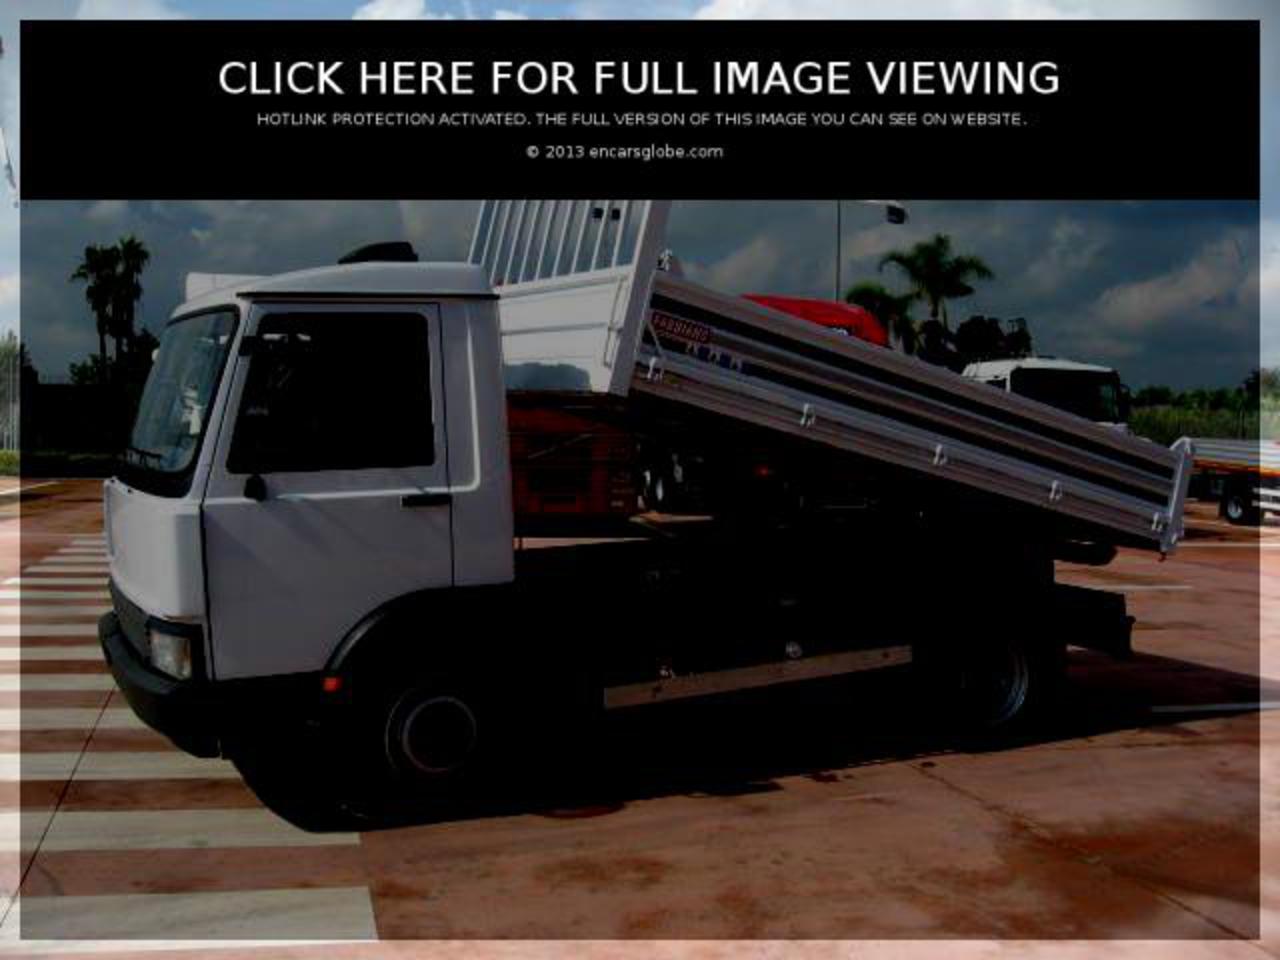 Zastava-Iveco 79-14: Photo gallery, complete information about ...